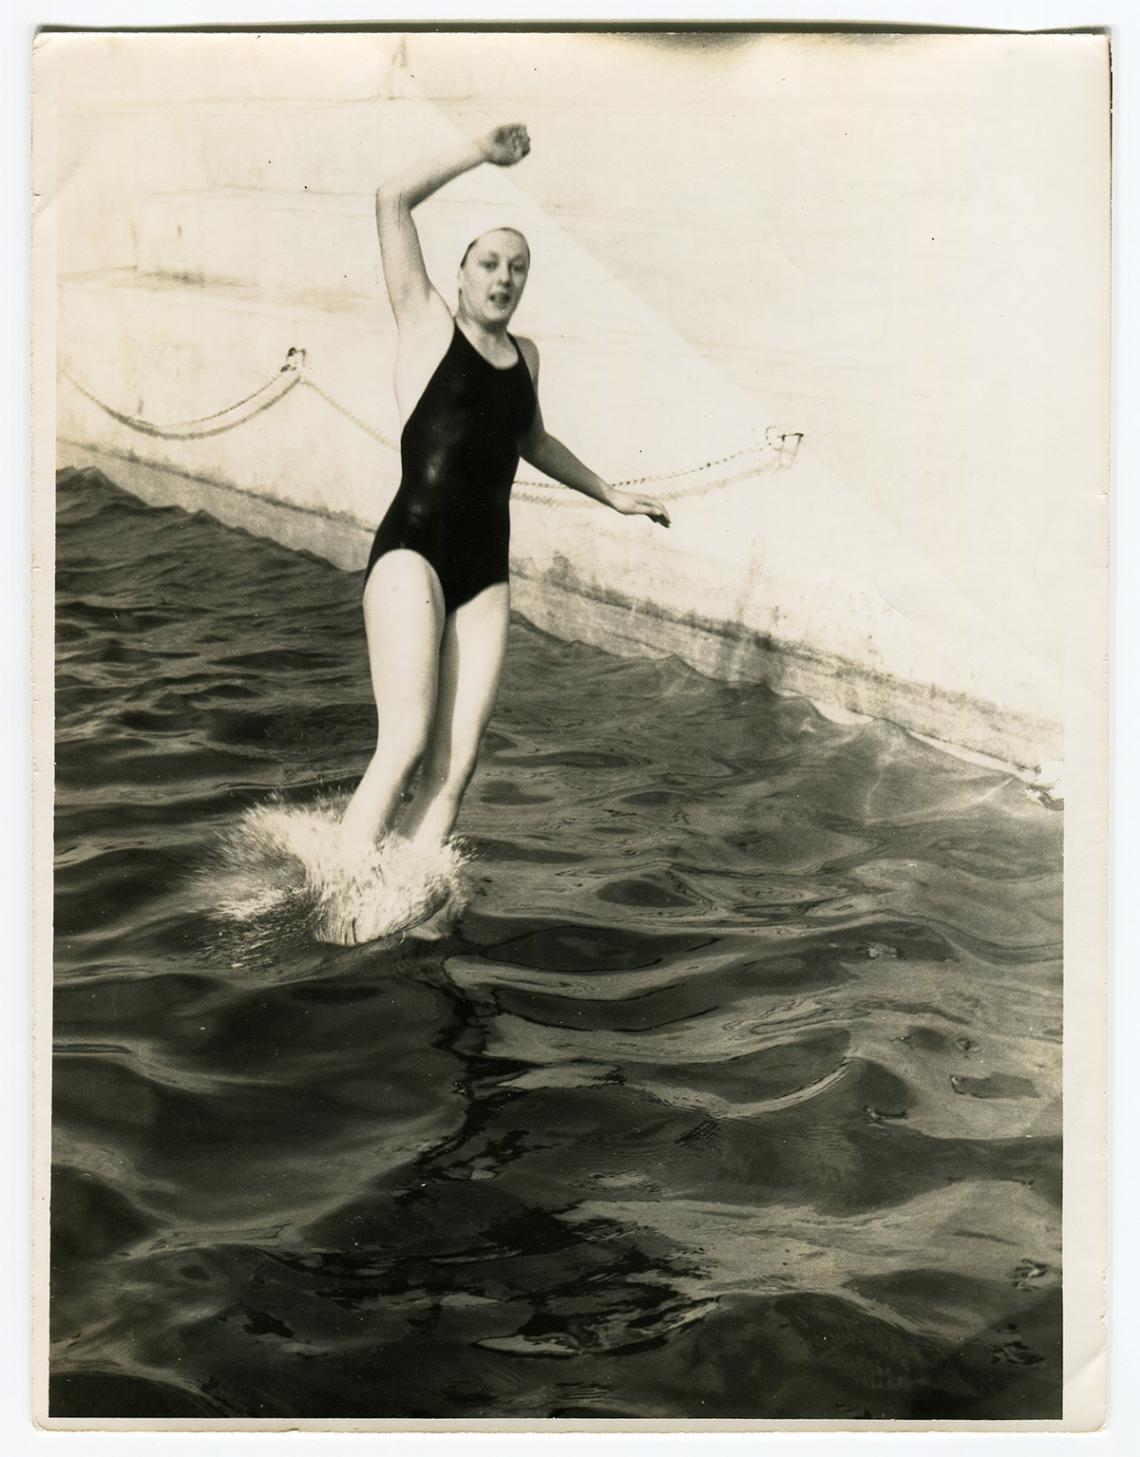 Phyllis Beare jumping in